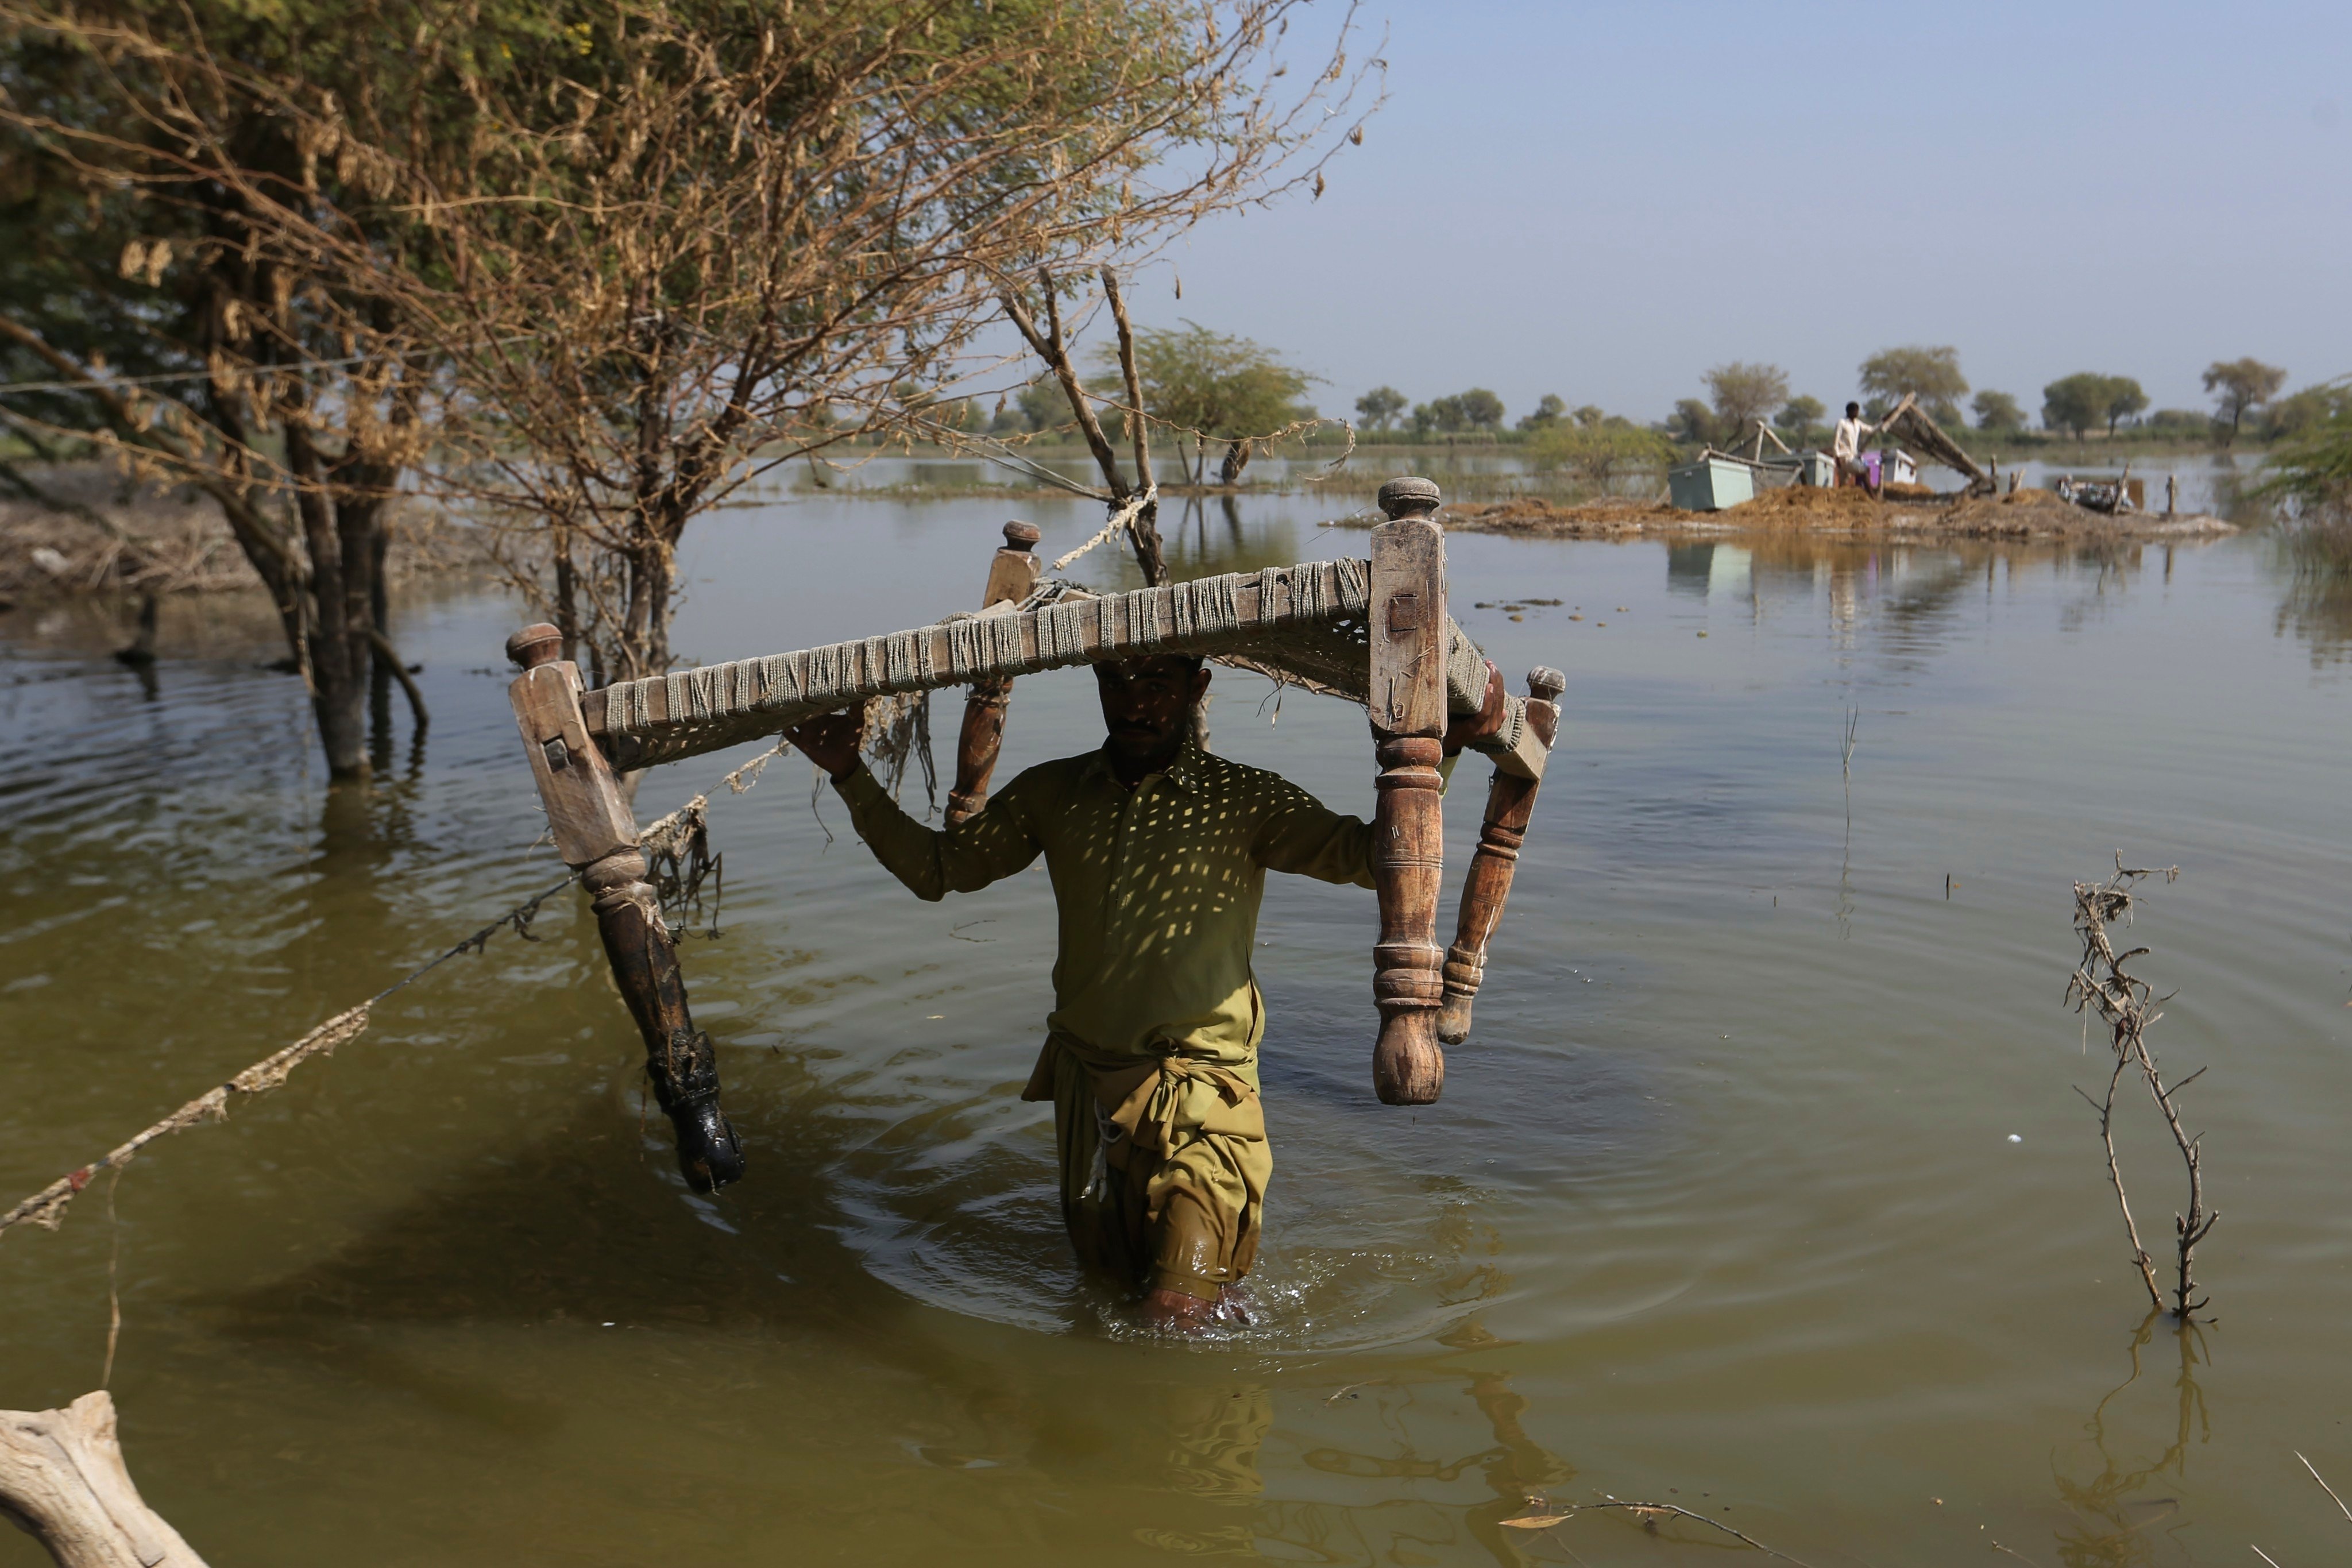 Villagers retrieve belongings in Sohbat Pur, a flood-hit district of Baluchistan province in Pakistan, on October 25, 2022. The rich world’s inaction on climate change is exacerbating environmental damage and social inequality in the developing world. Photo: AP